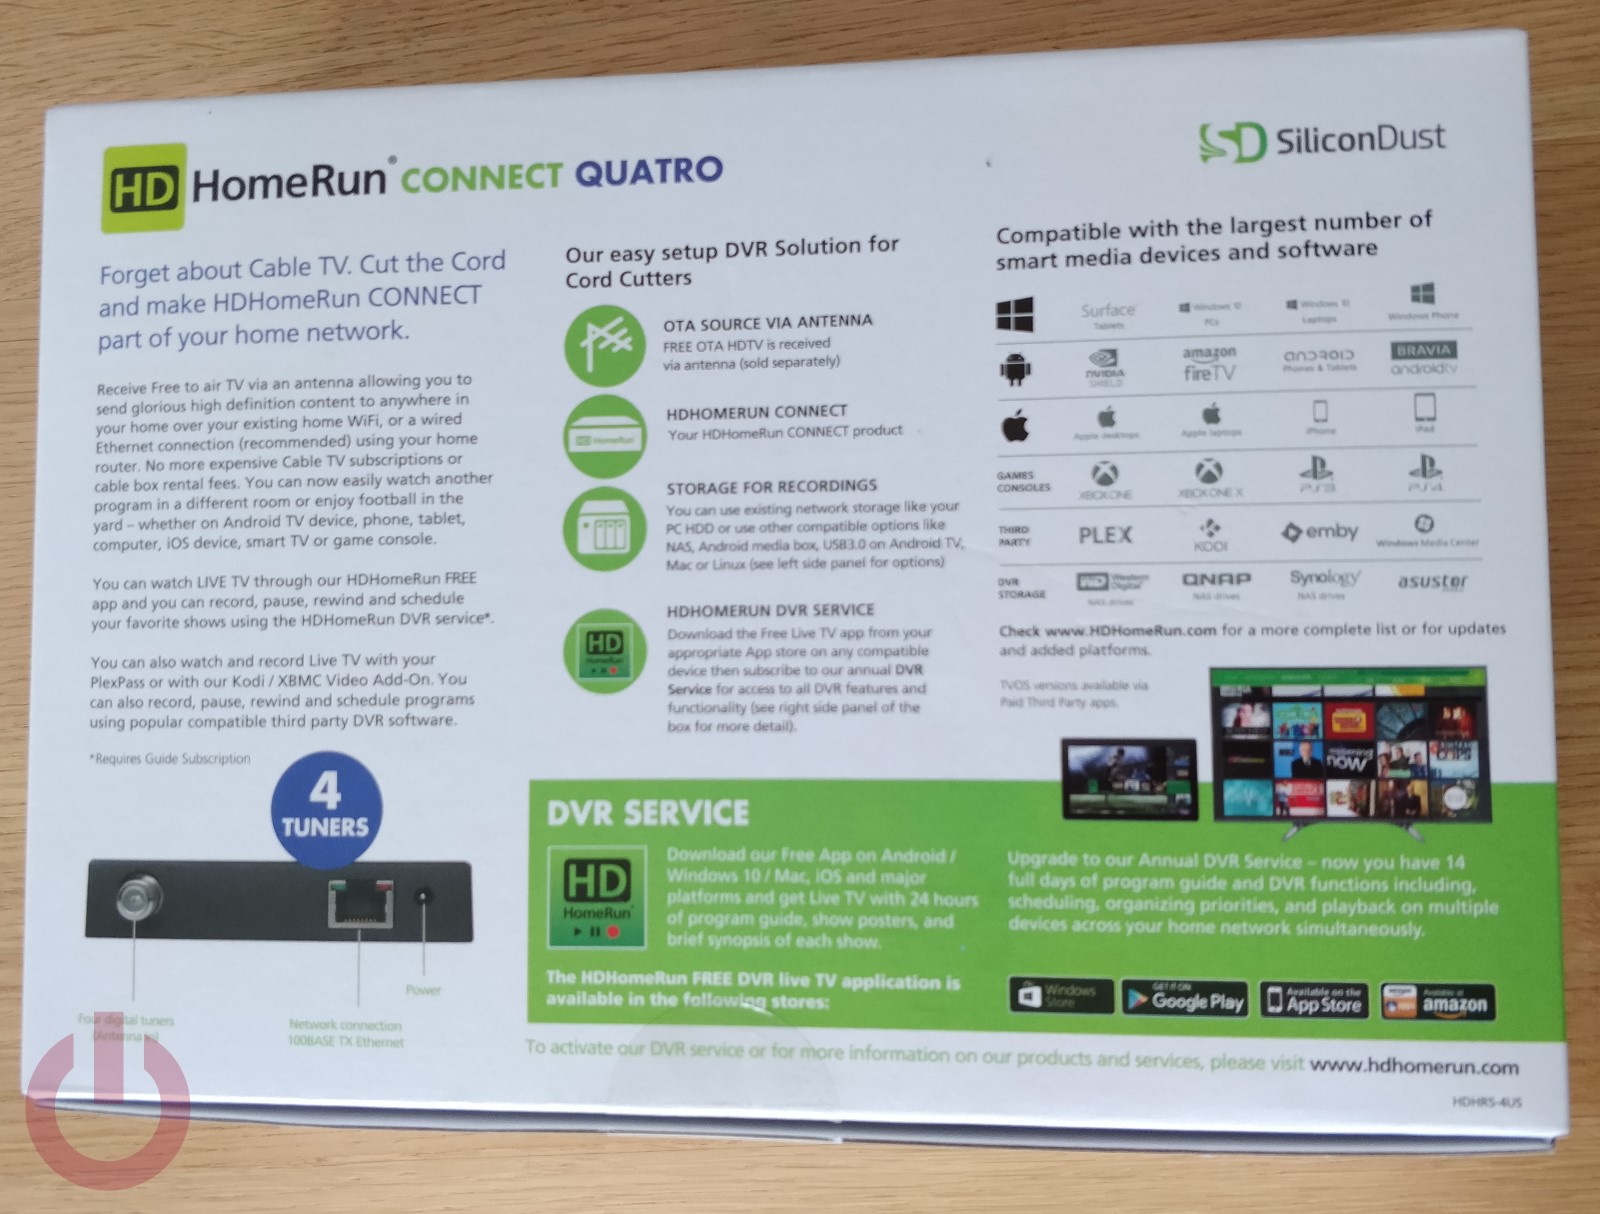 SiliconDust HDHR5-4US HDHomeRun Connect Quatro 4-Tuner Live TV for Cord Cutters Renewed 